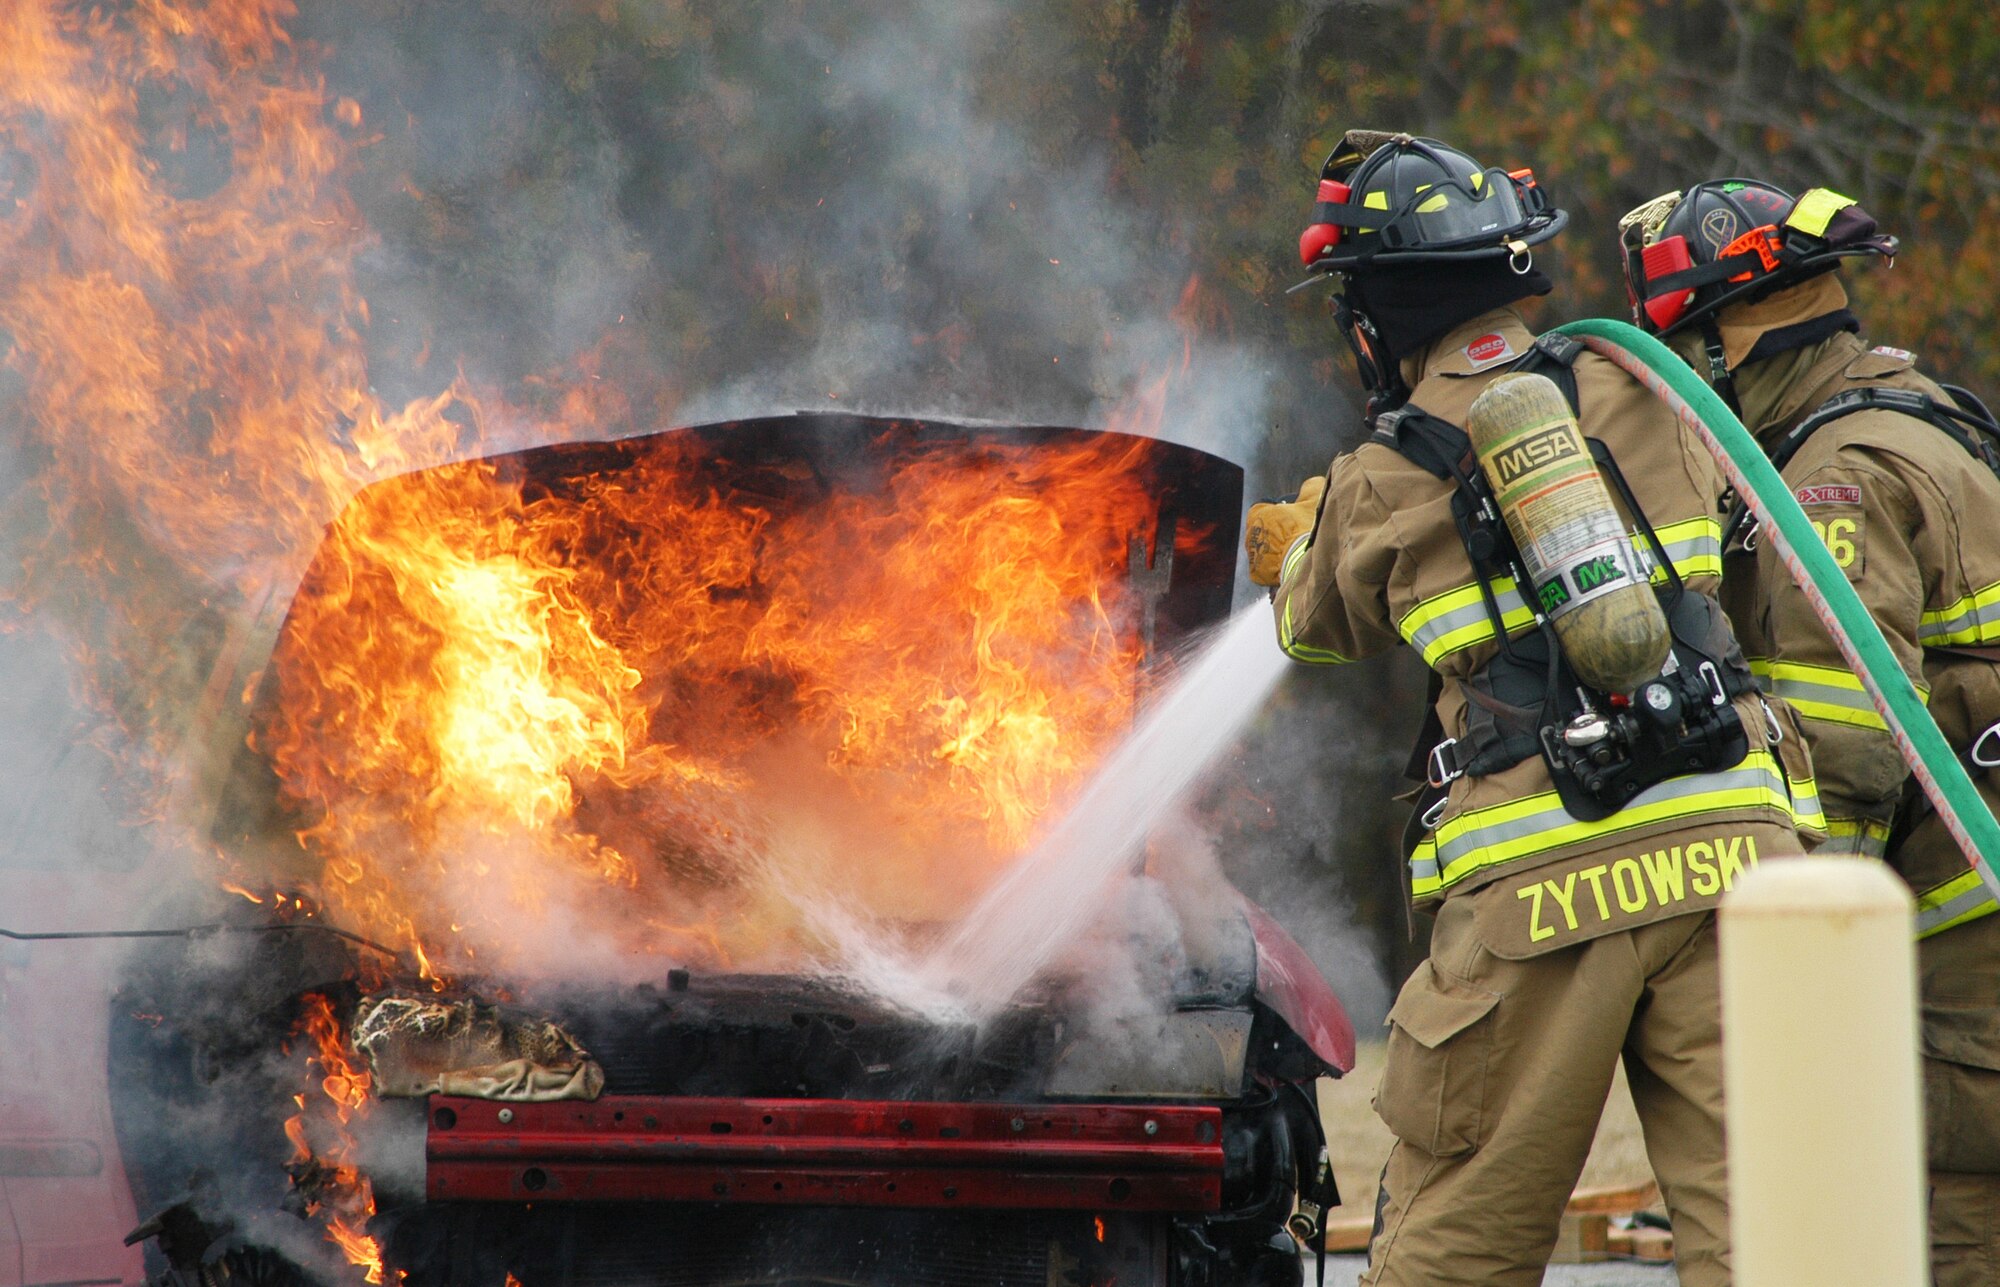 Robins firefighters Daniel Zytowski and John Whitson extinguish a car fire during a training exercise Jan. 10. The exercise scenario involved a two-car accident involving one vehicle on fire with an injured person outside of the car and two injured passengers in the second car on Beale Drive near Bldg. 10.(U. S. Air Force photo/Sue Sapp)